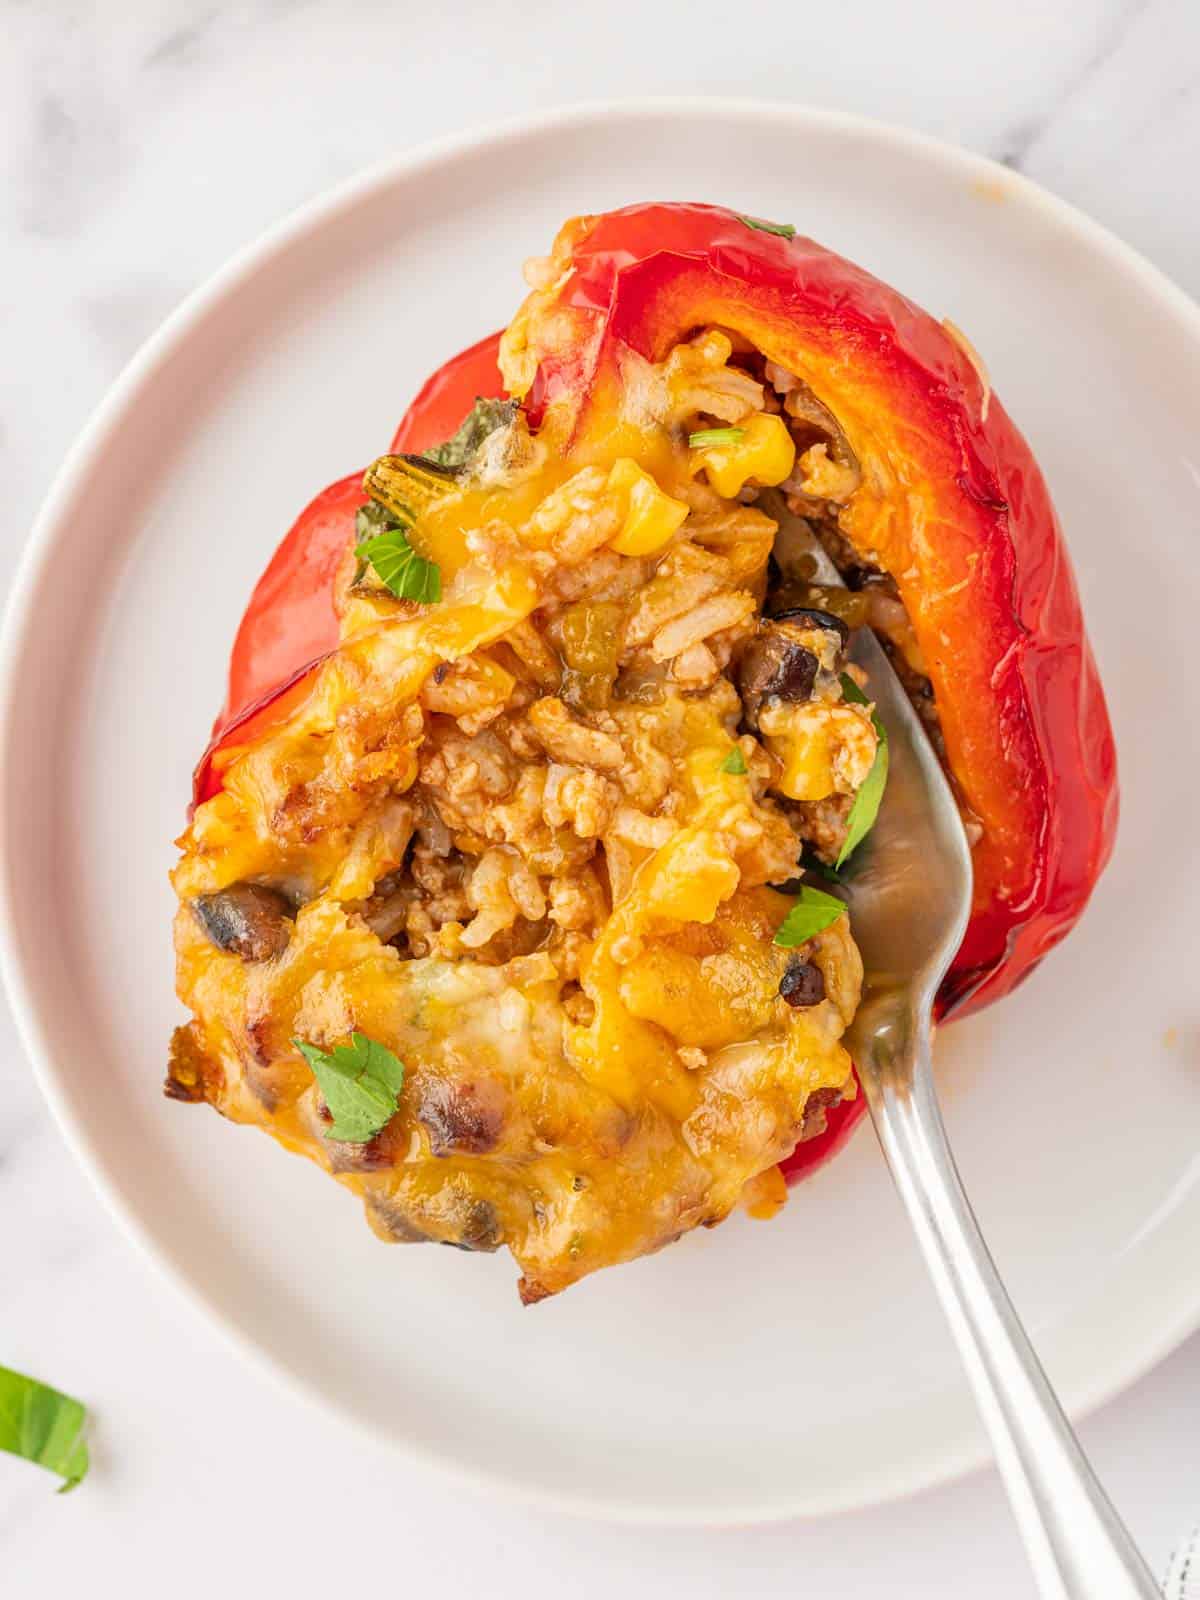 A fork scoops filling out of a stuffed pepper.